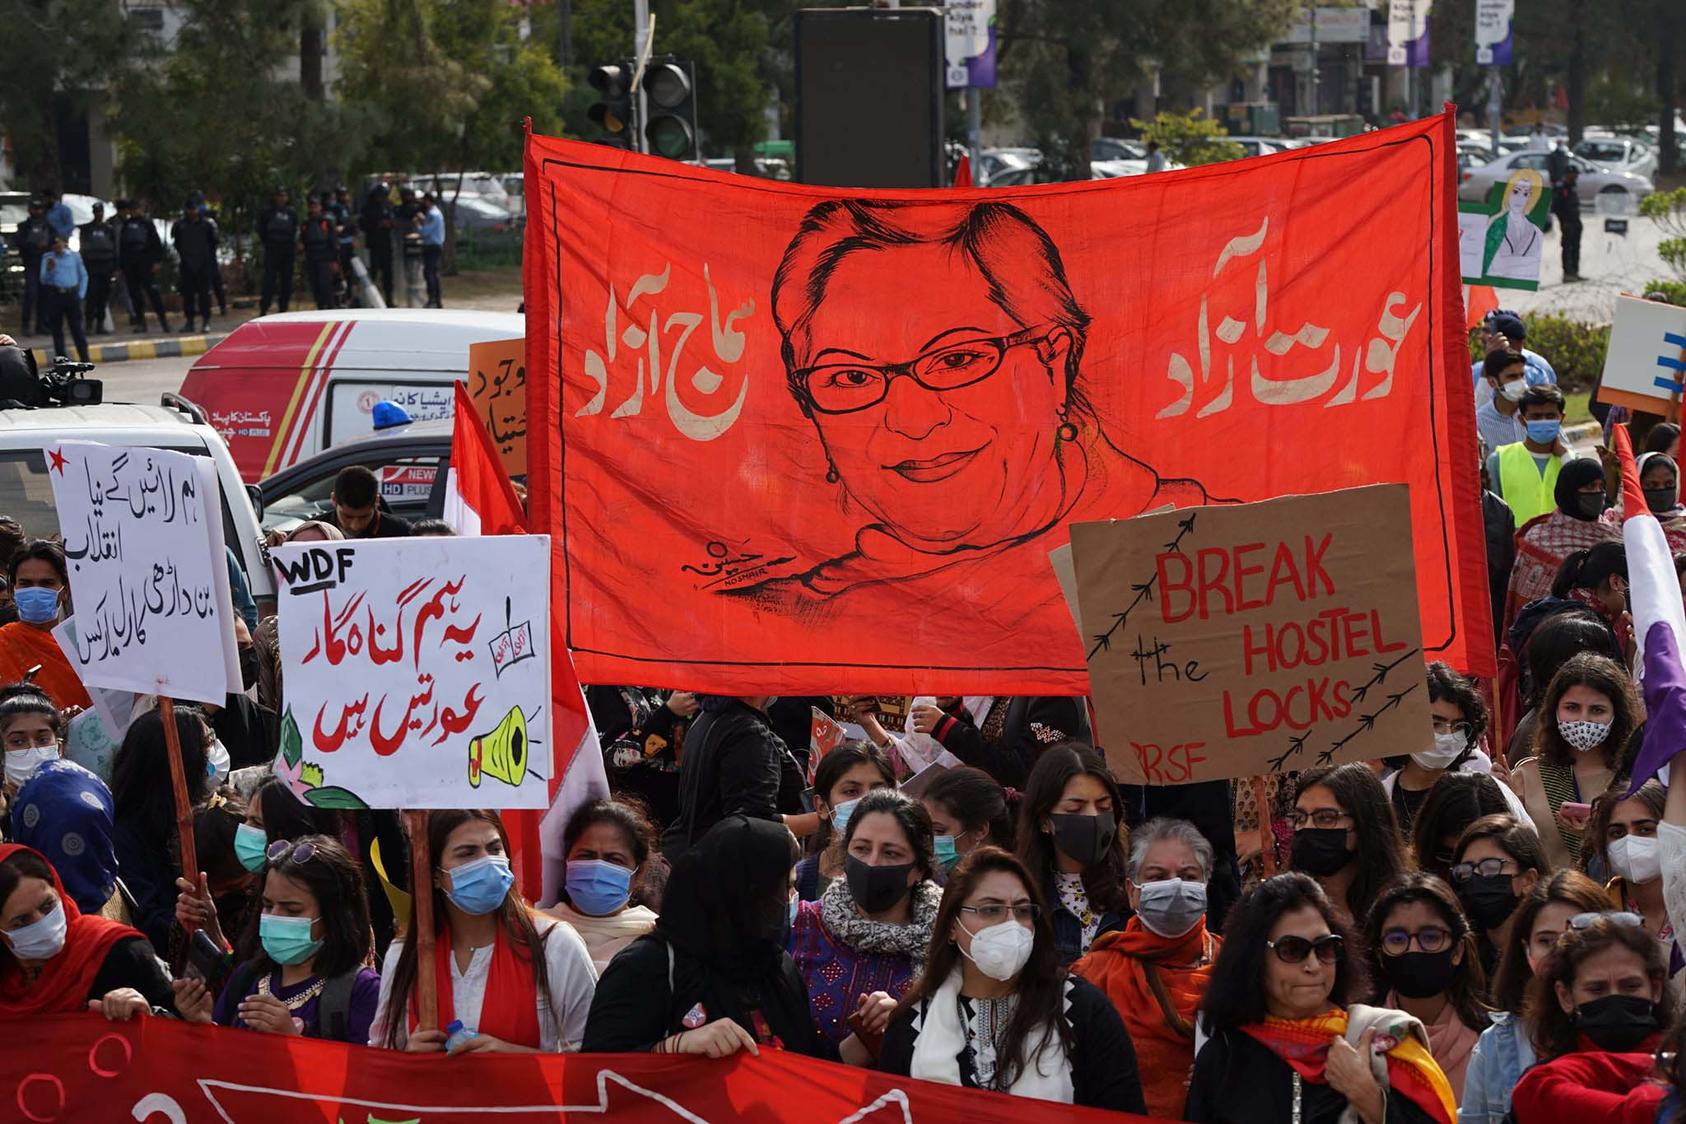 Women rally at the 2021 Aurat March in Islamabad with a banner memorializing Asma Jahangir, a long-prominent human rights activist. (Hassan Turi/Aurat Azadi March)